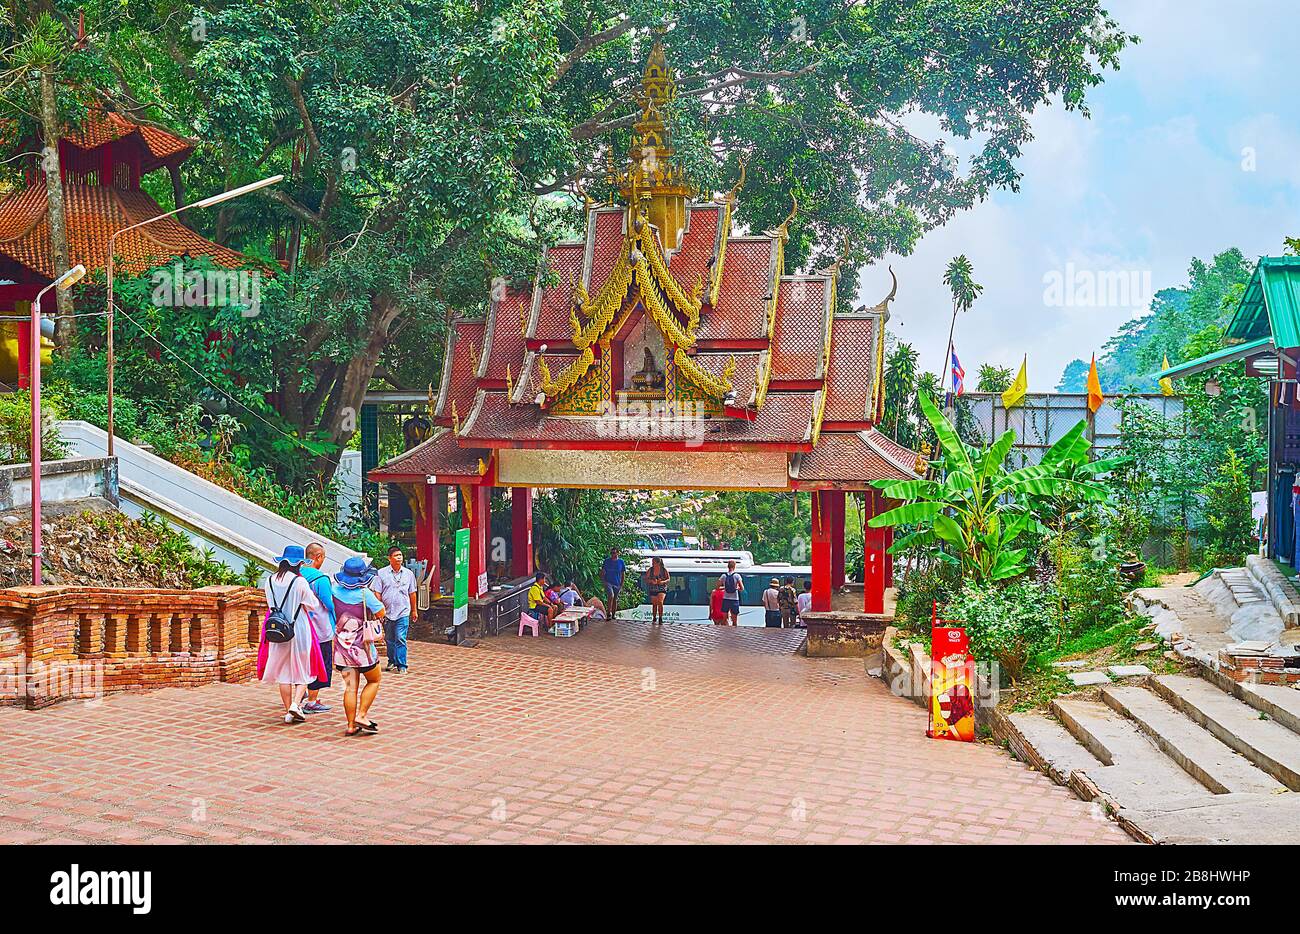 CHIANG MAI, THAILAND - MAY 7, 2019: The gate and stairs at the foot of the slope of Doi Suthep Mountain, leading to the Wat Phra That Doi Suthep templ Stock Photo